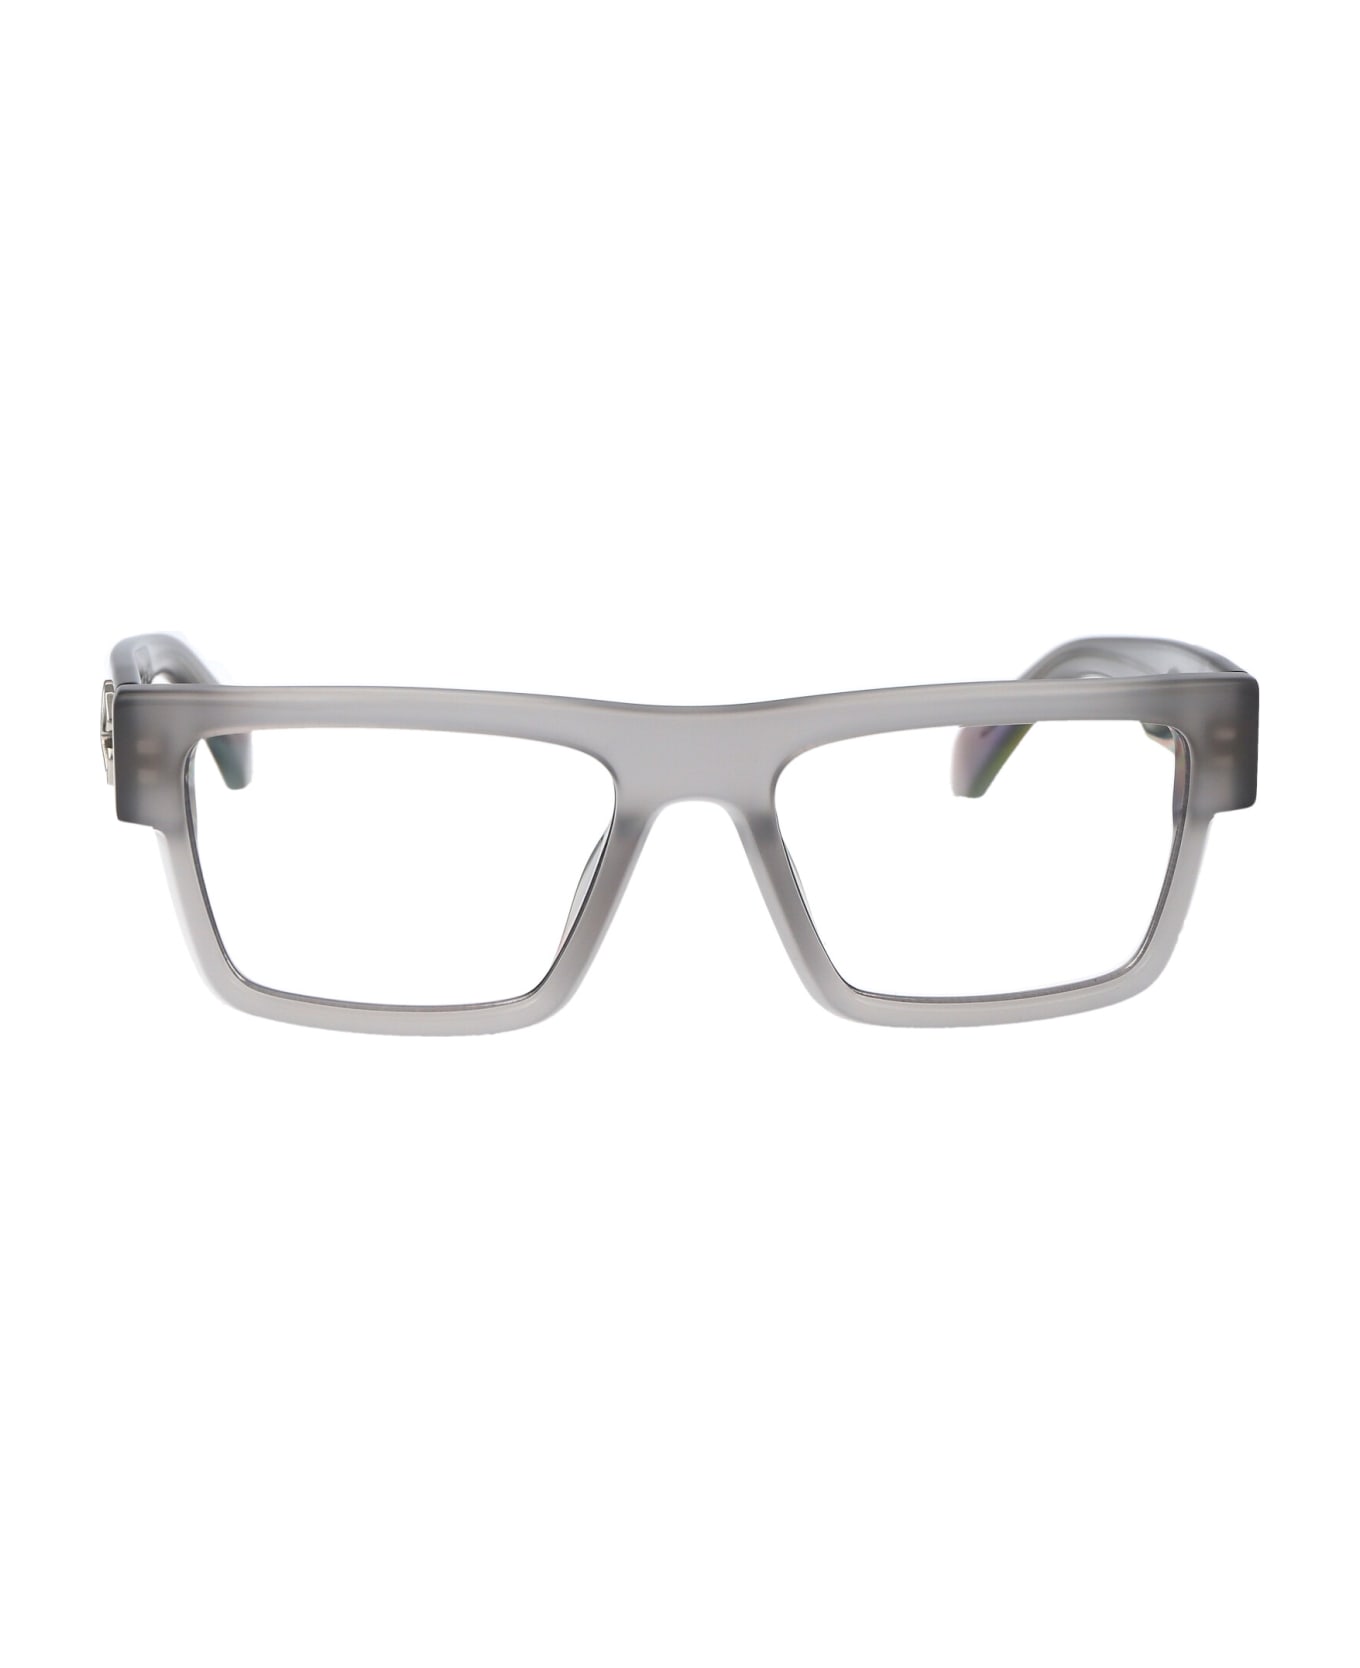 Off-White Optical Style 61 Glasses - 0900 GREY 